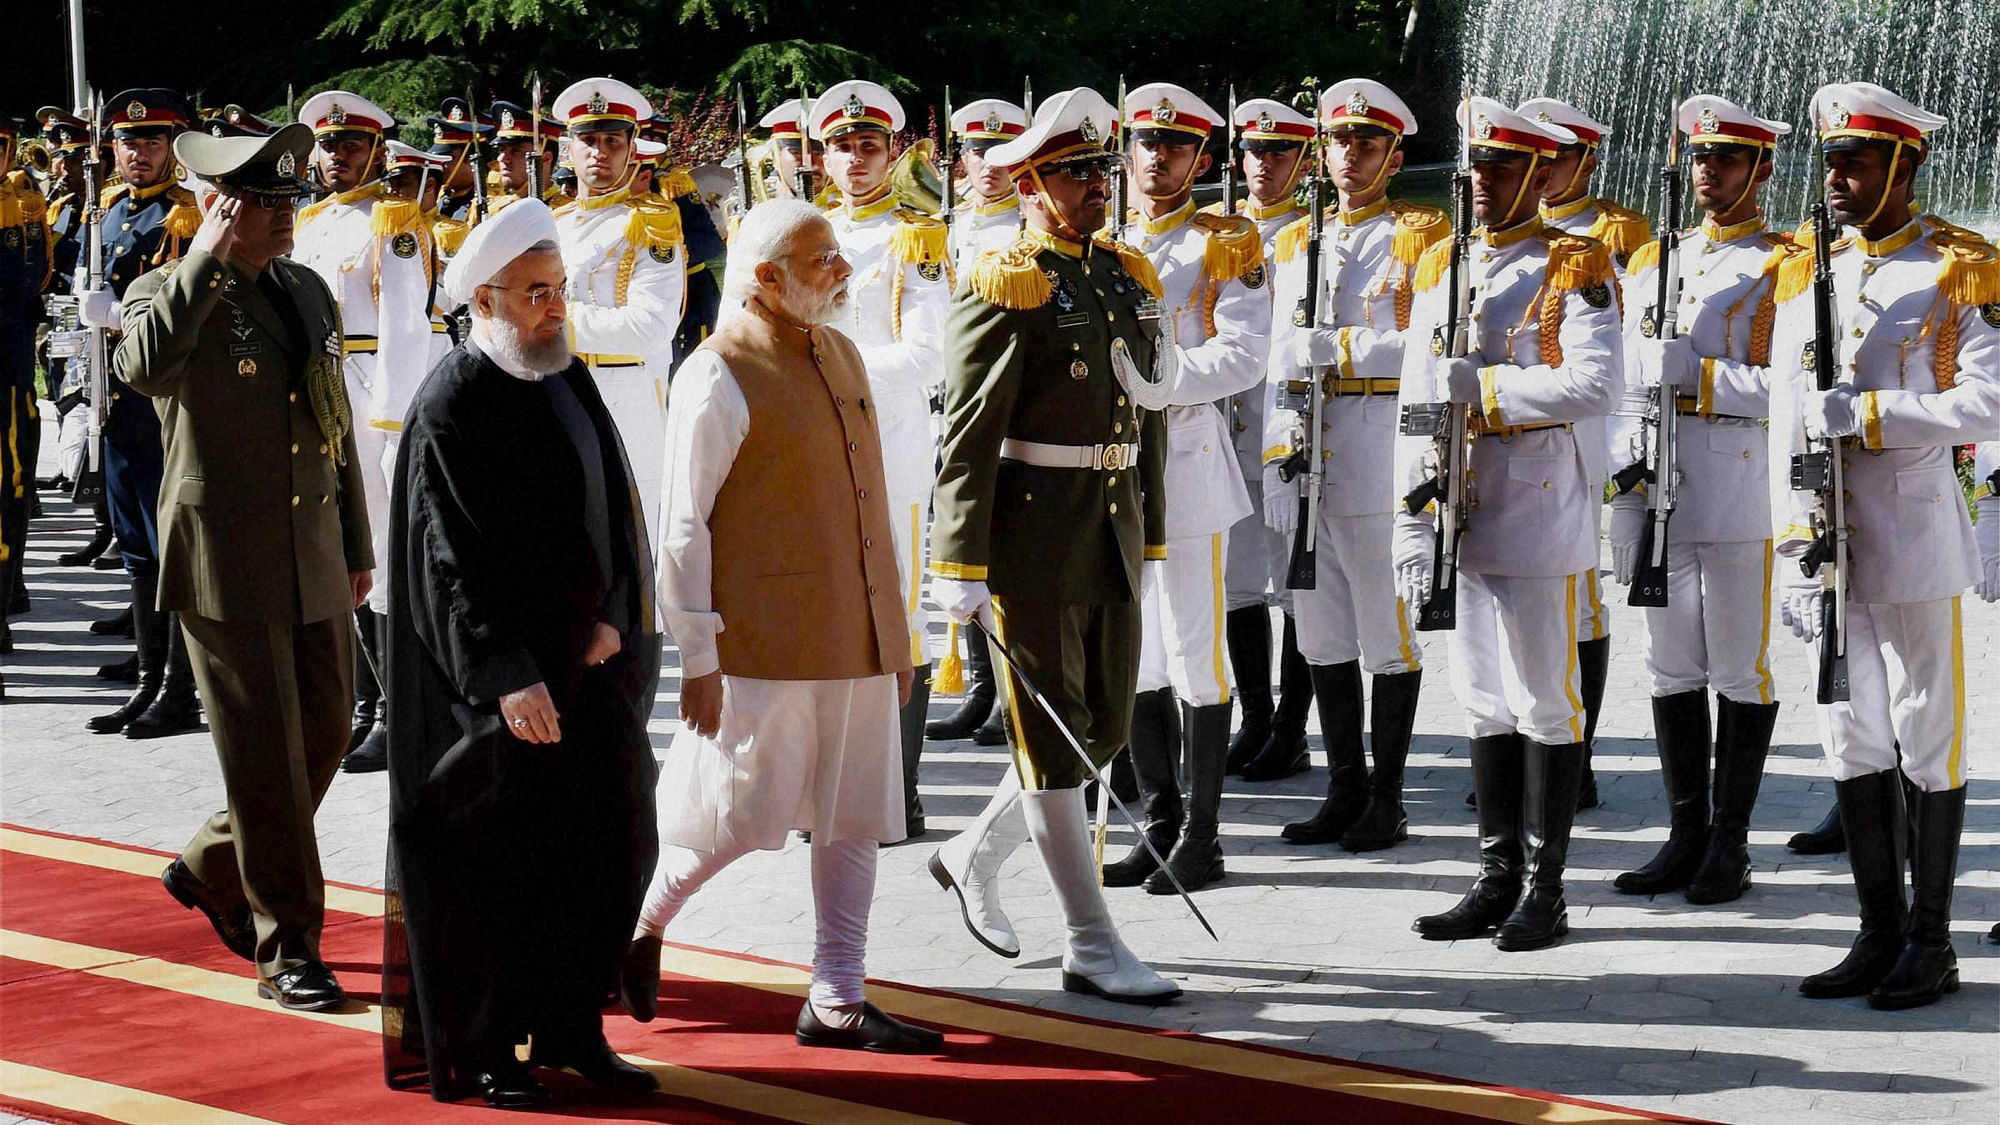 

Prime Minister Narendra Modi with Iranian President Hassan Rouhani reviewing guard of honour at the Saabad Palace in Tehran, Iran, on 23 May. (Photo Courtesy: PTI)